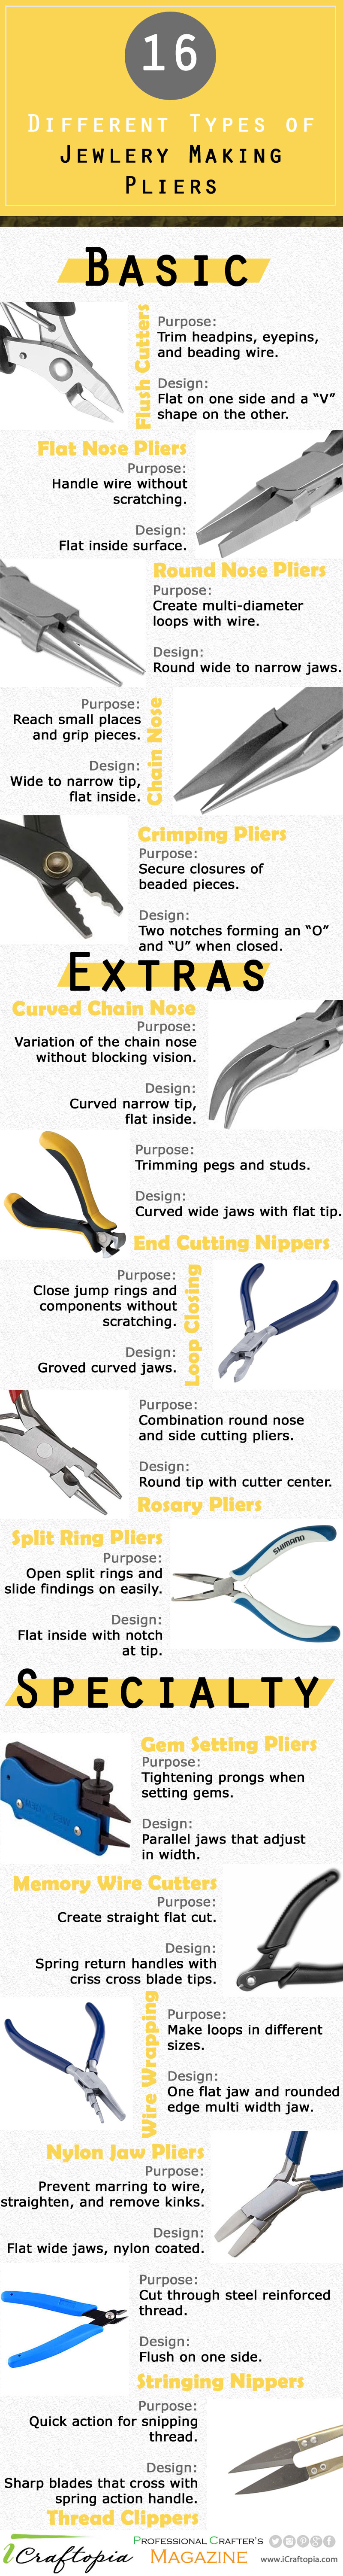 Different-Types-of-Jewelry-Making-Pliers